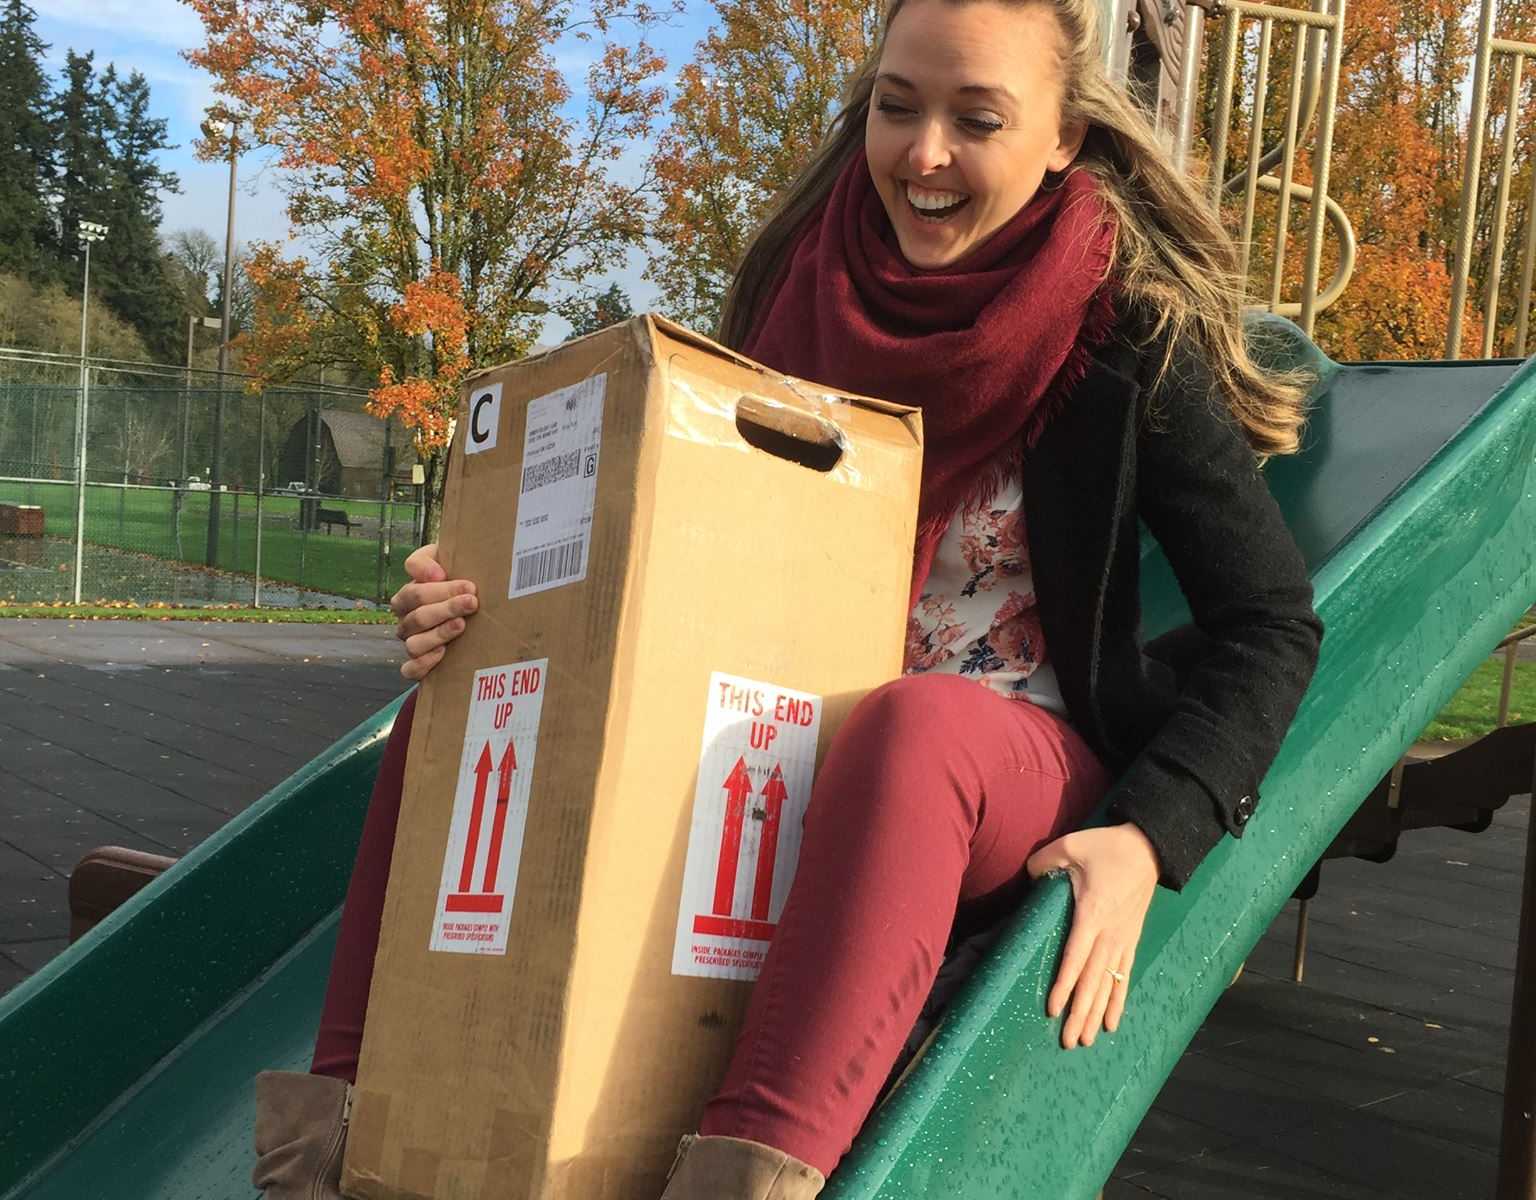 woman smiling and going down a slide at a playground while holding a box of embryos